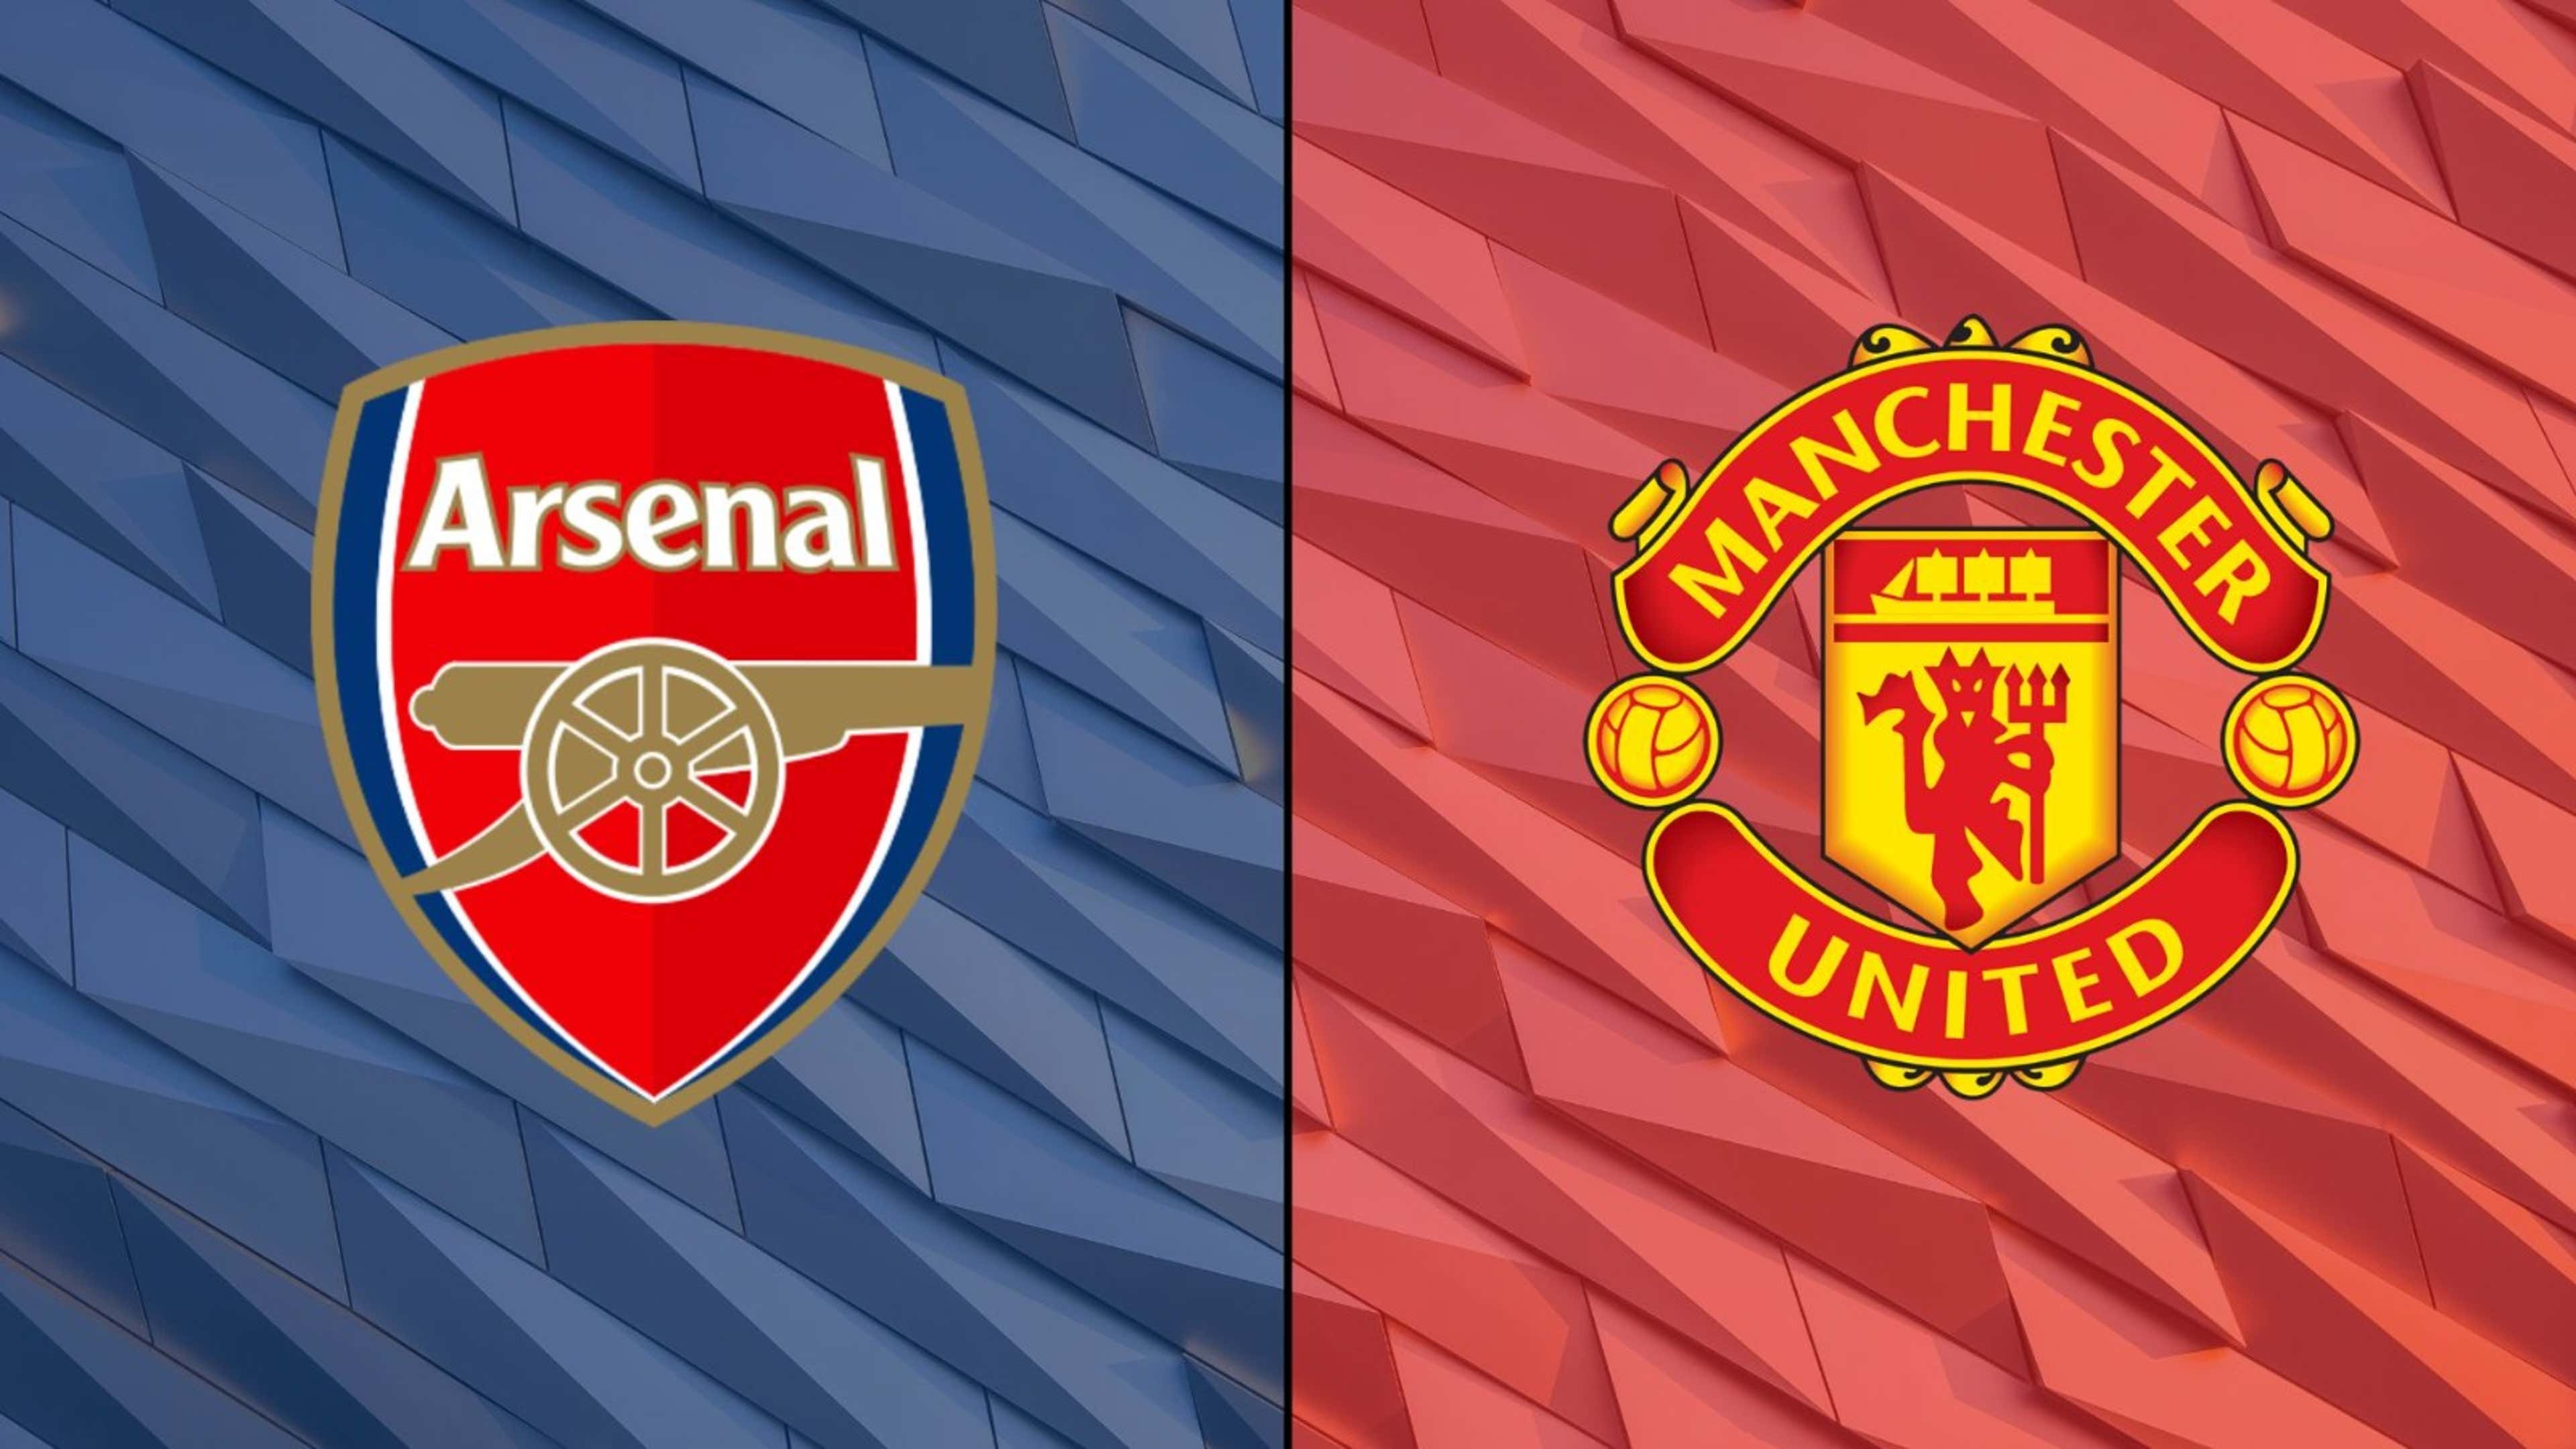 Arsenal vs Manchester United Prediction and Betting Tips